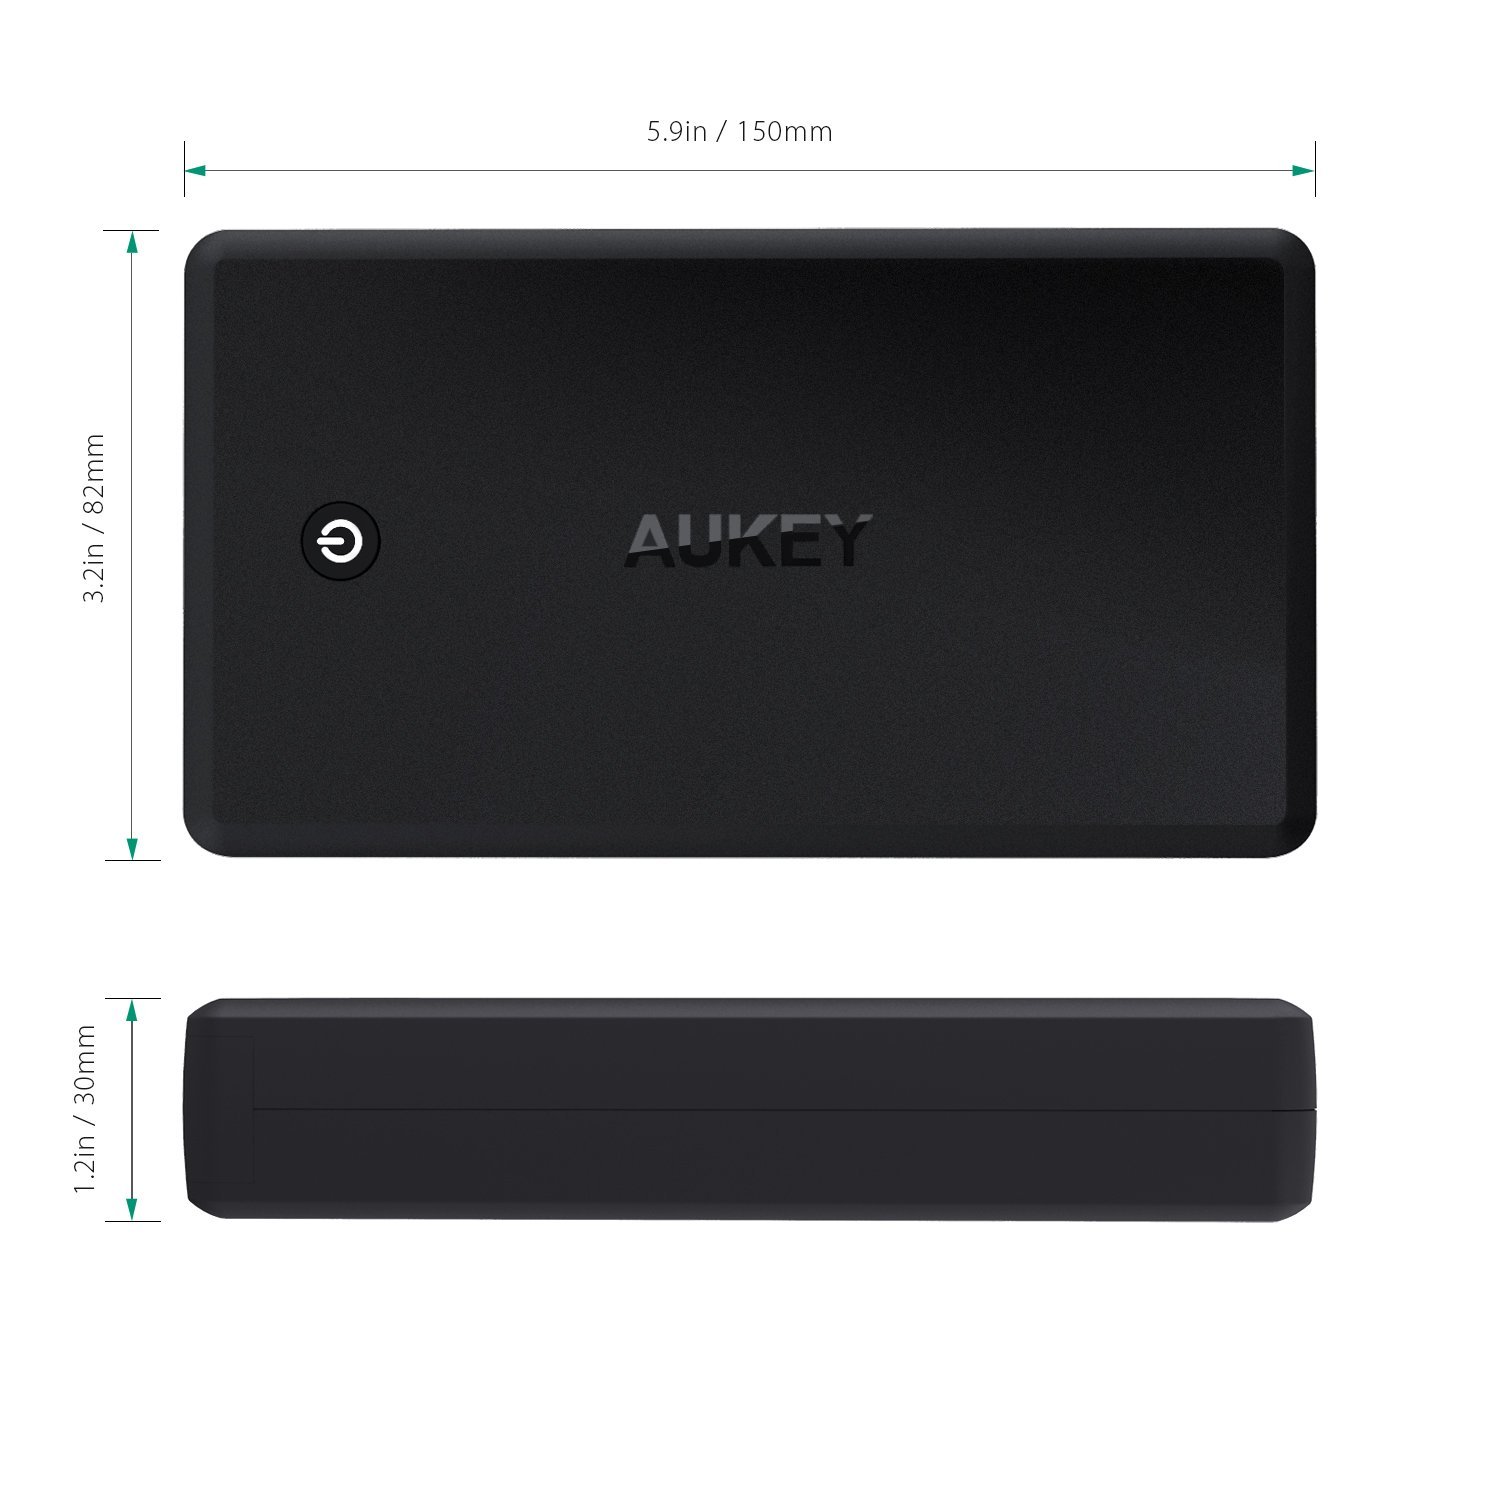 AUKEY Portable Charger with Power Delivery, Charge 3.0, and AiPower Charging Ports for MacBook, iPad, iPhone, Android Phones, Speakers, and More - CHARGE WITH POWER